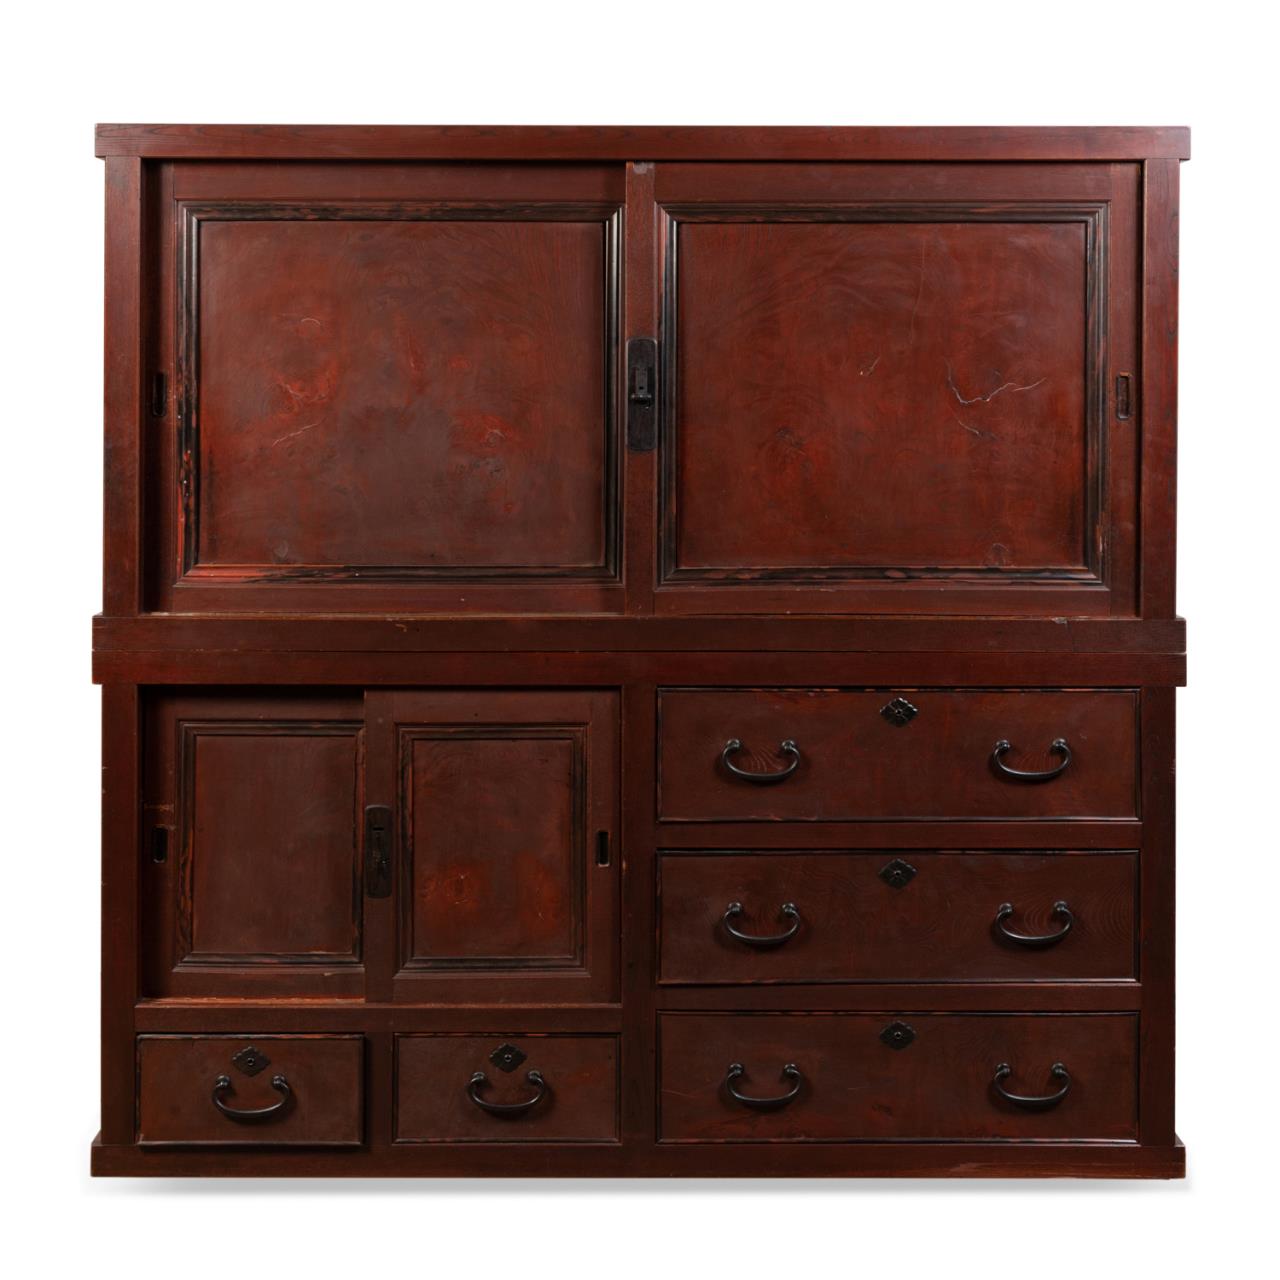 LARGE RED STAINED JAPANESE CABINET